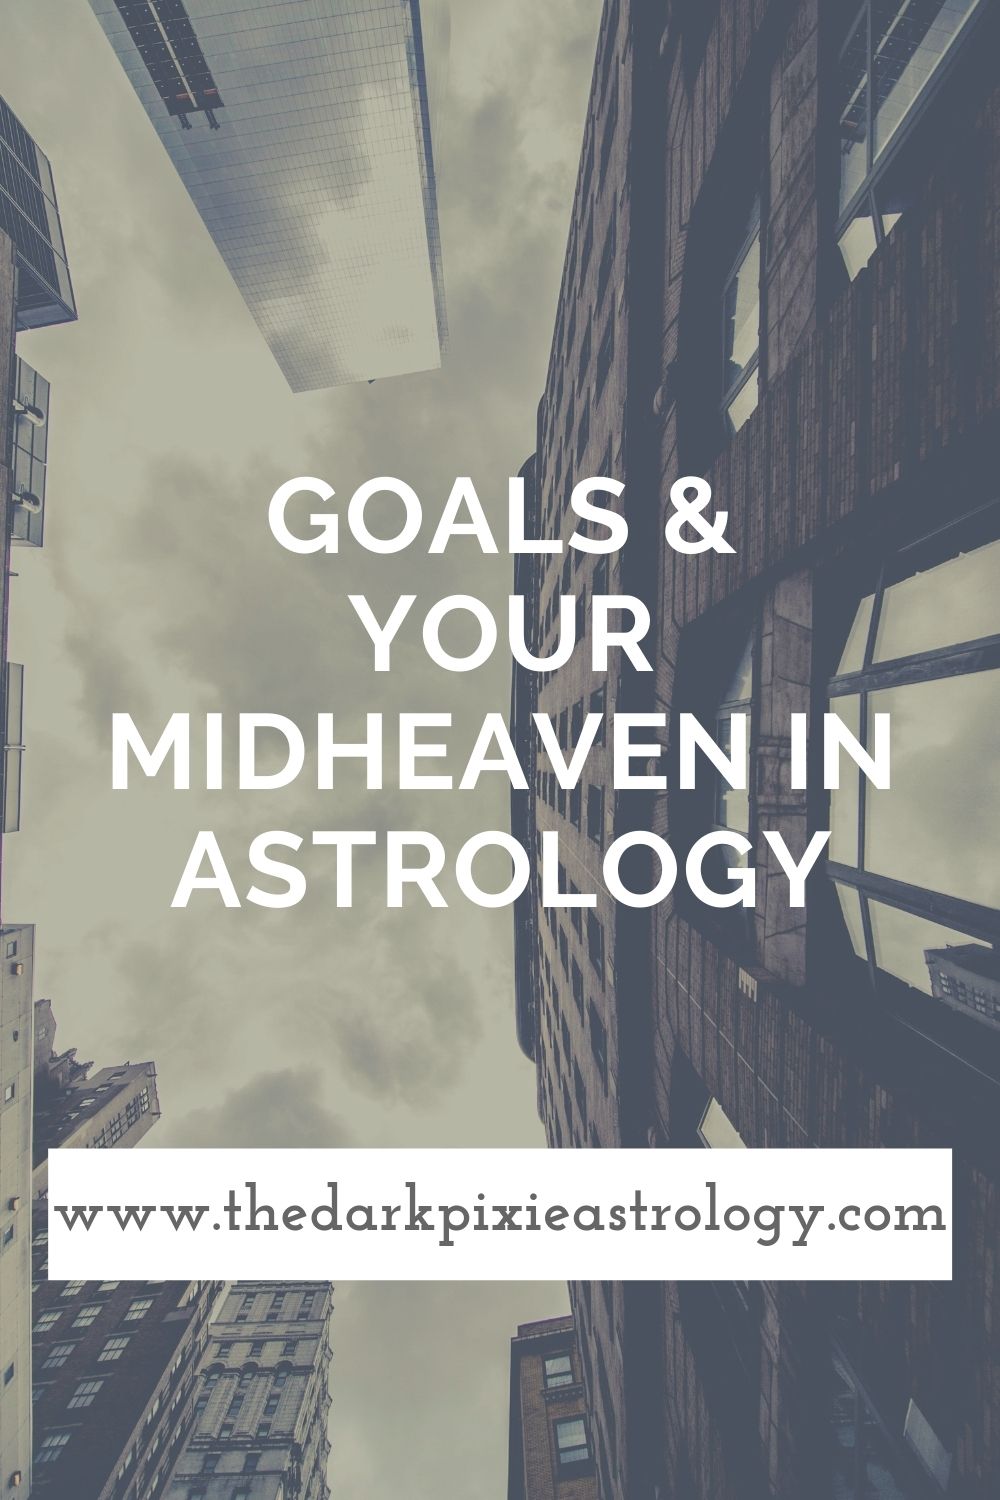 Goals & Your Midheaven in Astrology - The Dark Pixie Astrology